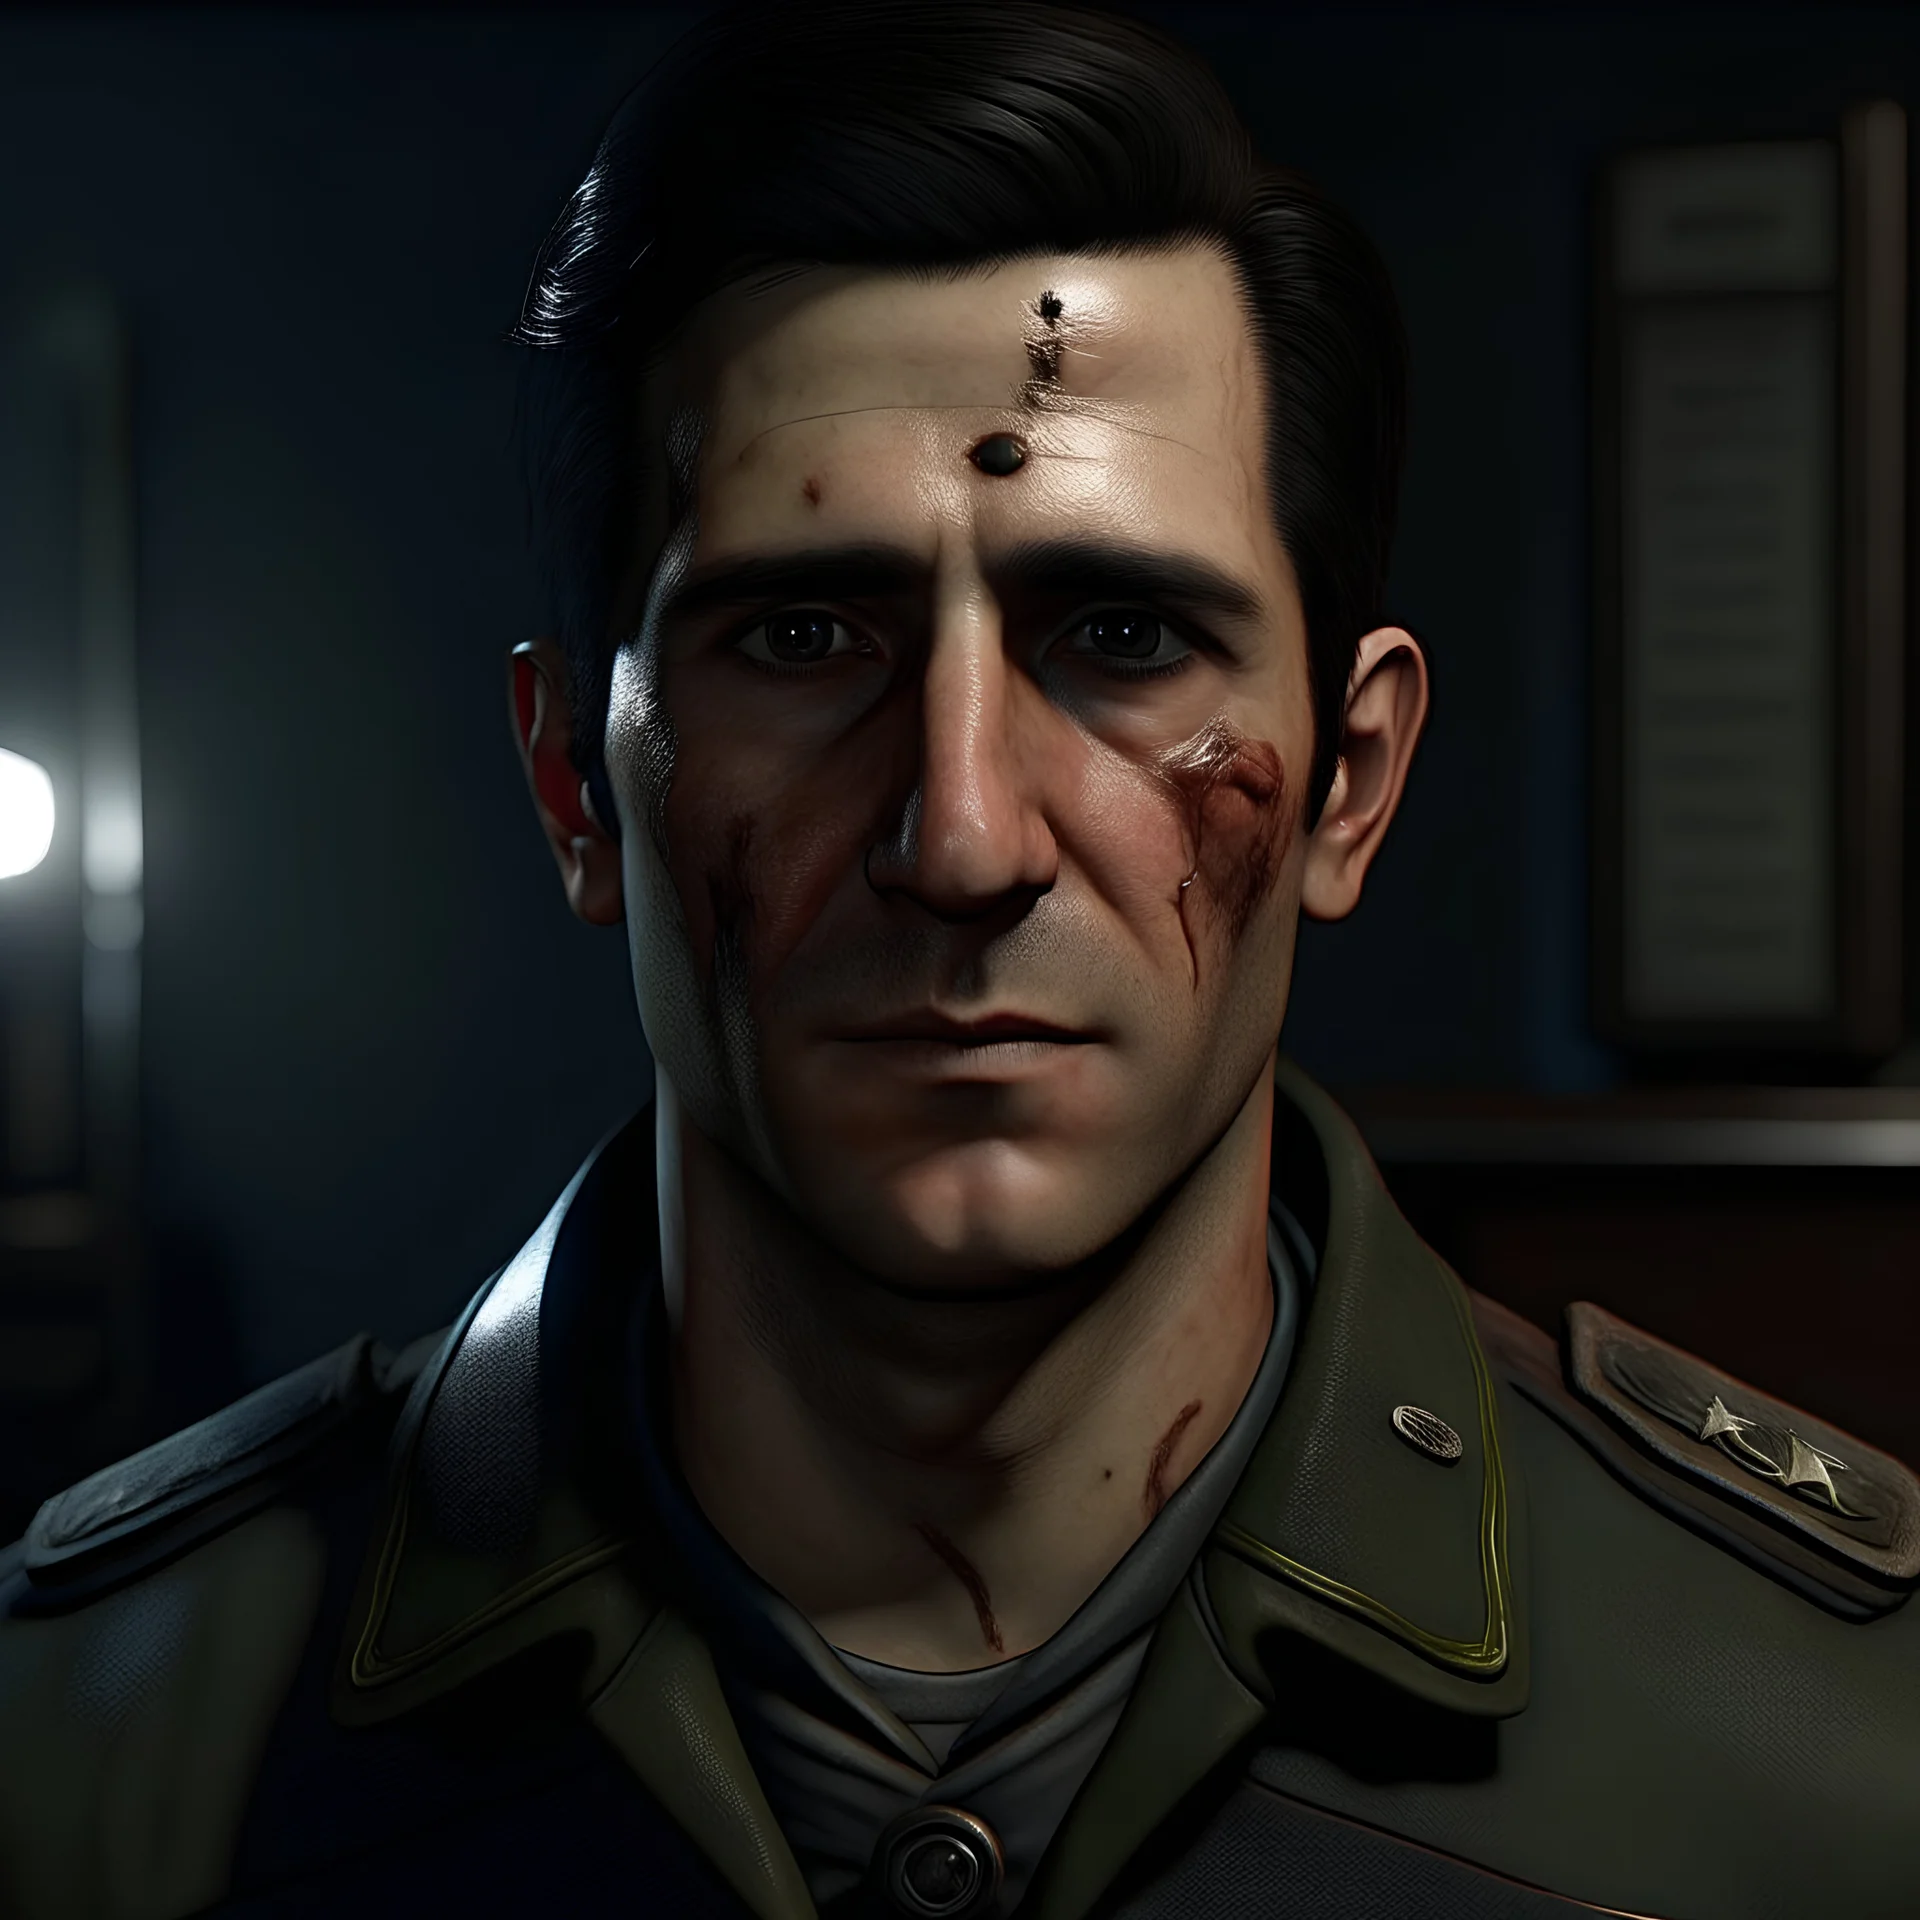 The submarine medic Sylas Steinhardt, a well groomed dark haired man with scars on his face realistic grimdark setting